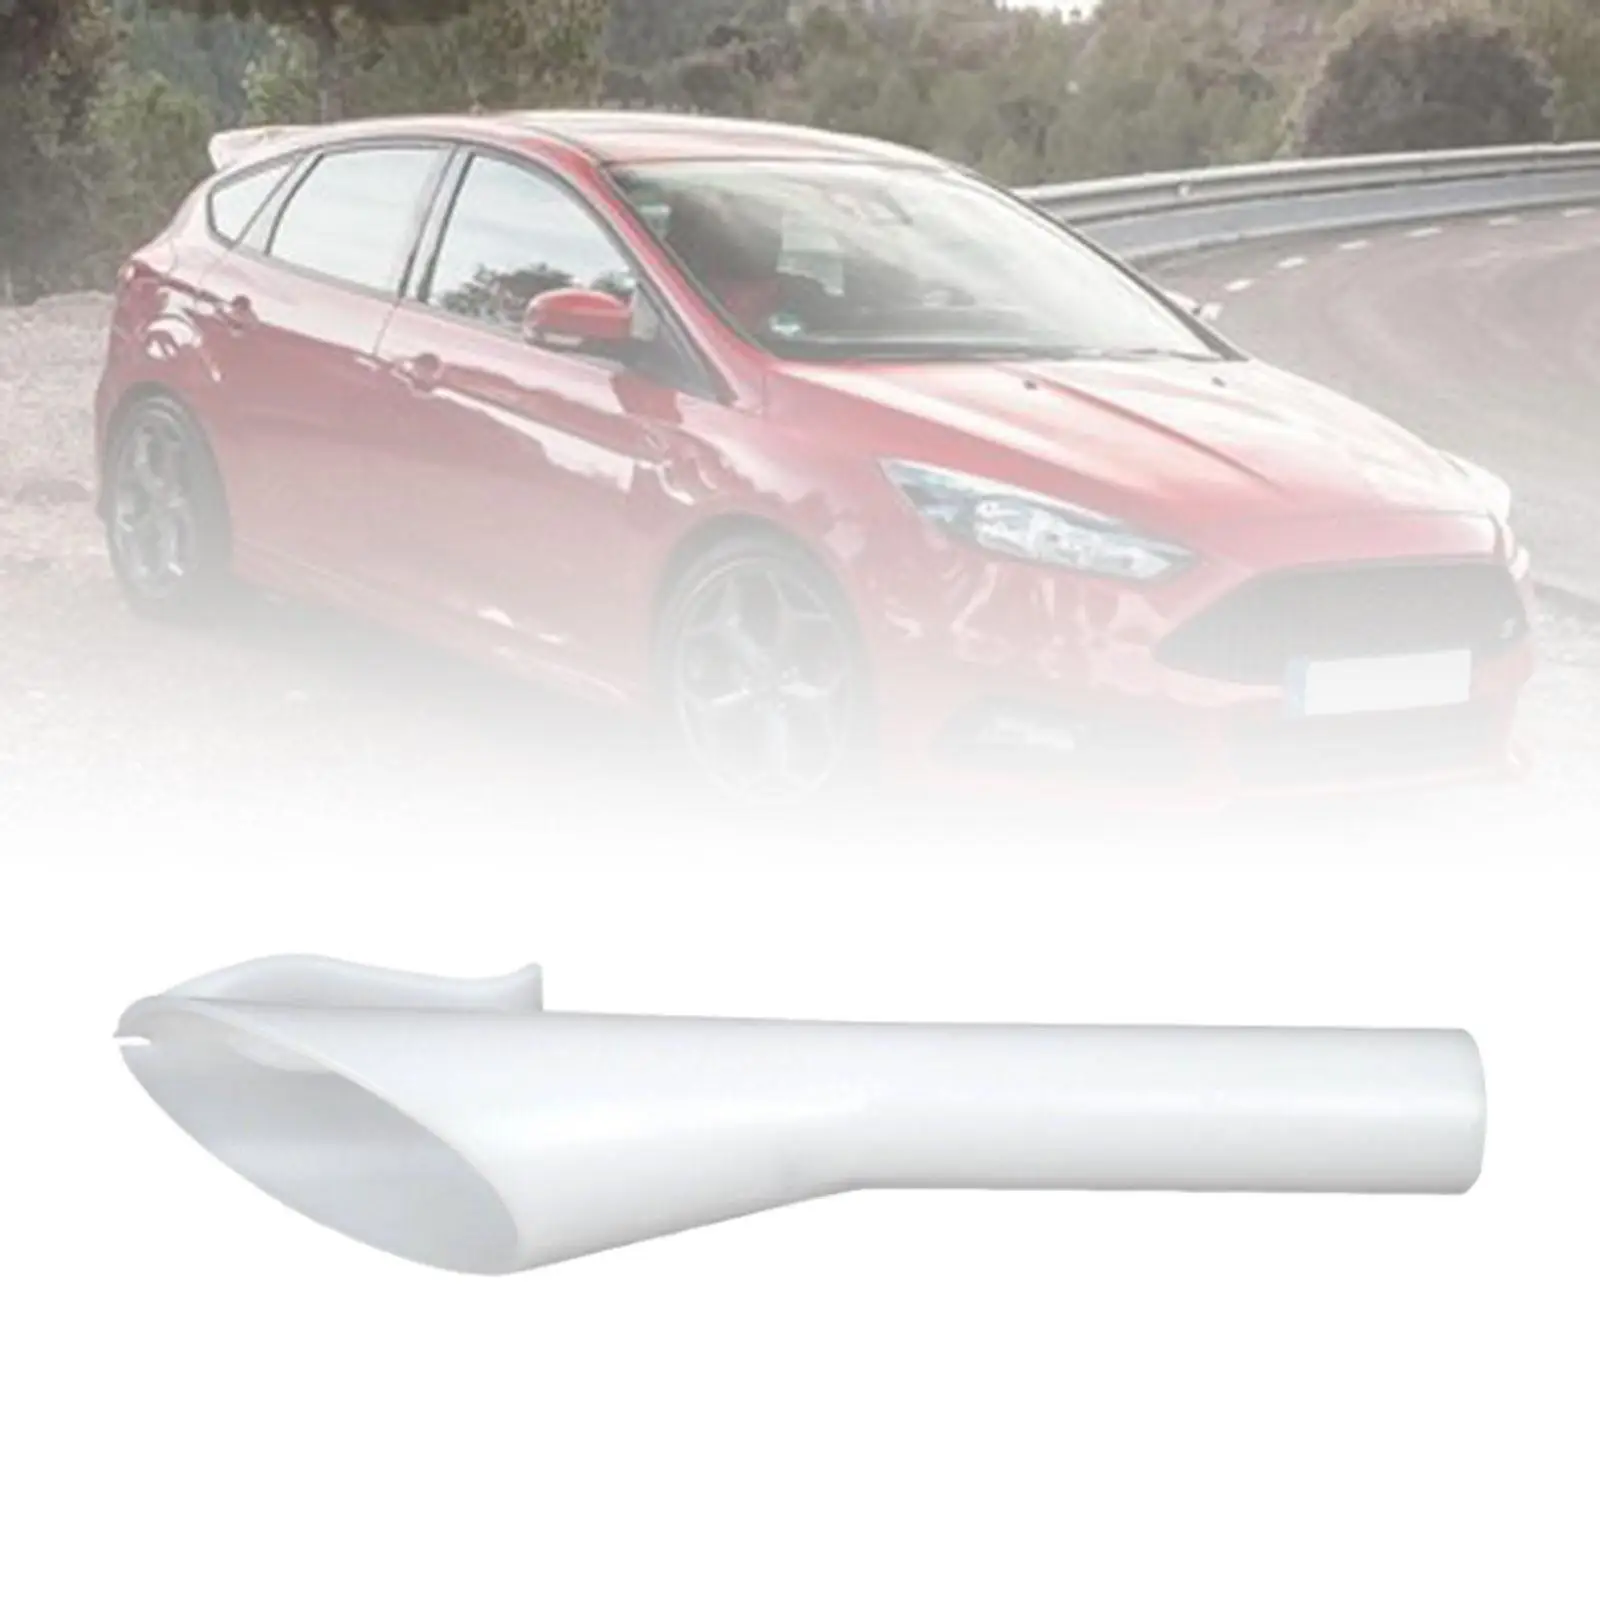 Oil Funnel Car Accessories Convenient Installation Fuel Tank Filler Neck Sleeve for Ford Kuga Fiesta Focus C Max B Max